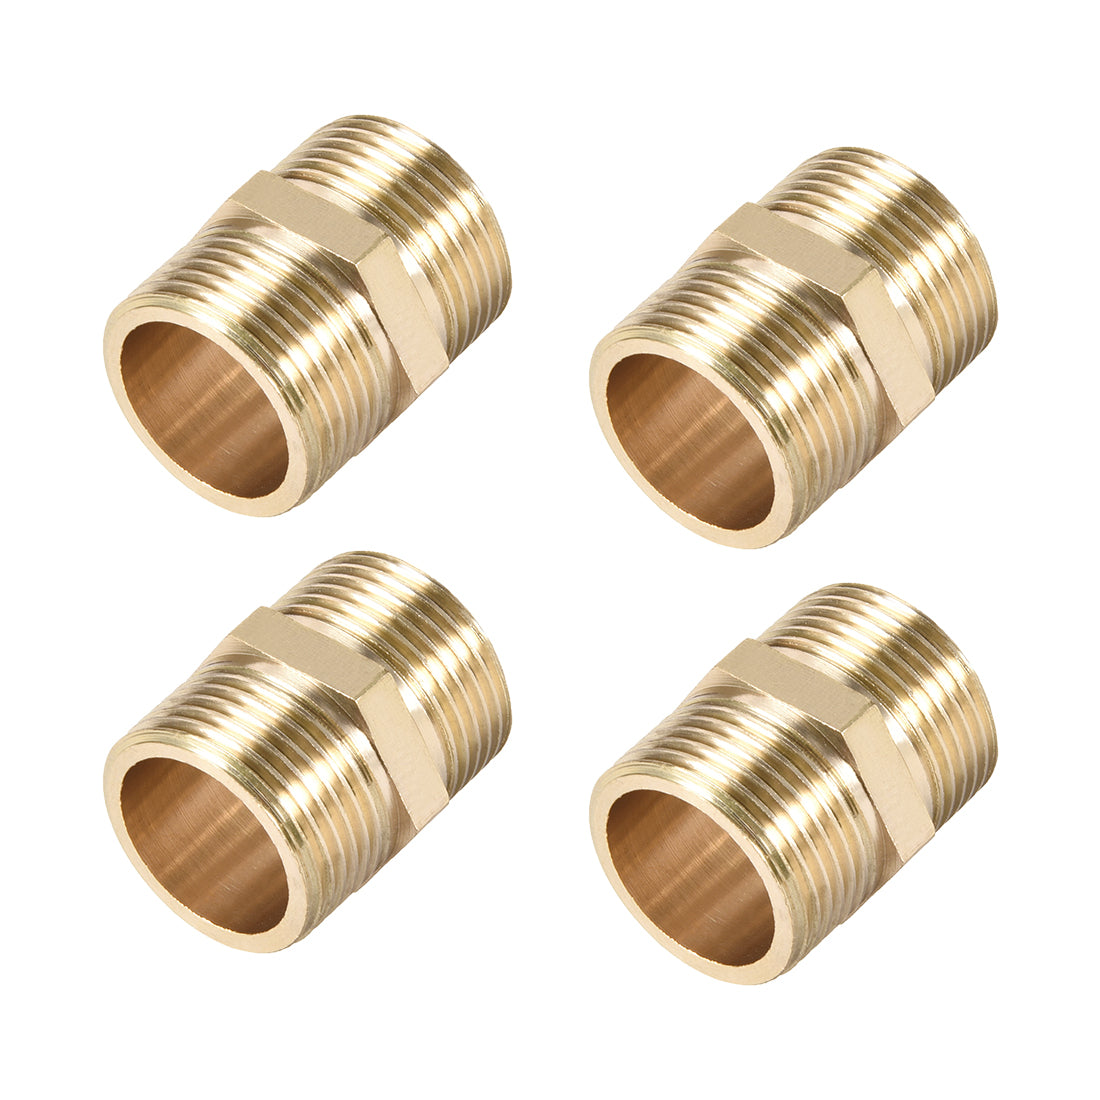 uxcell Uxcell Brass Pipe Fitting Connector Straight Hex Nipple Coupler 3/4 x 3/4 G Male Thread Hose Fittings Gold Tone 4pcs